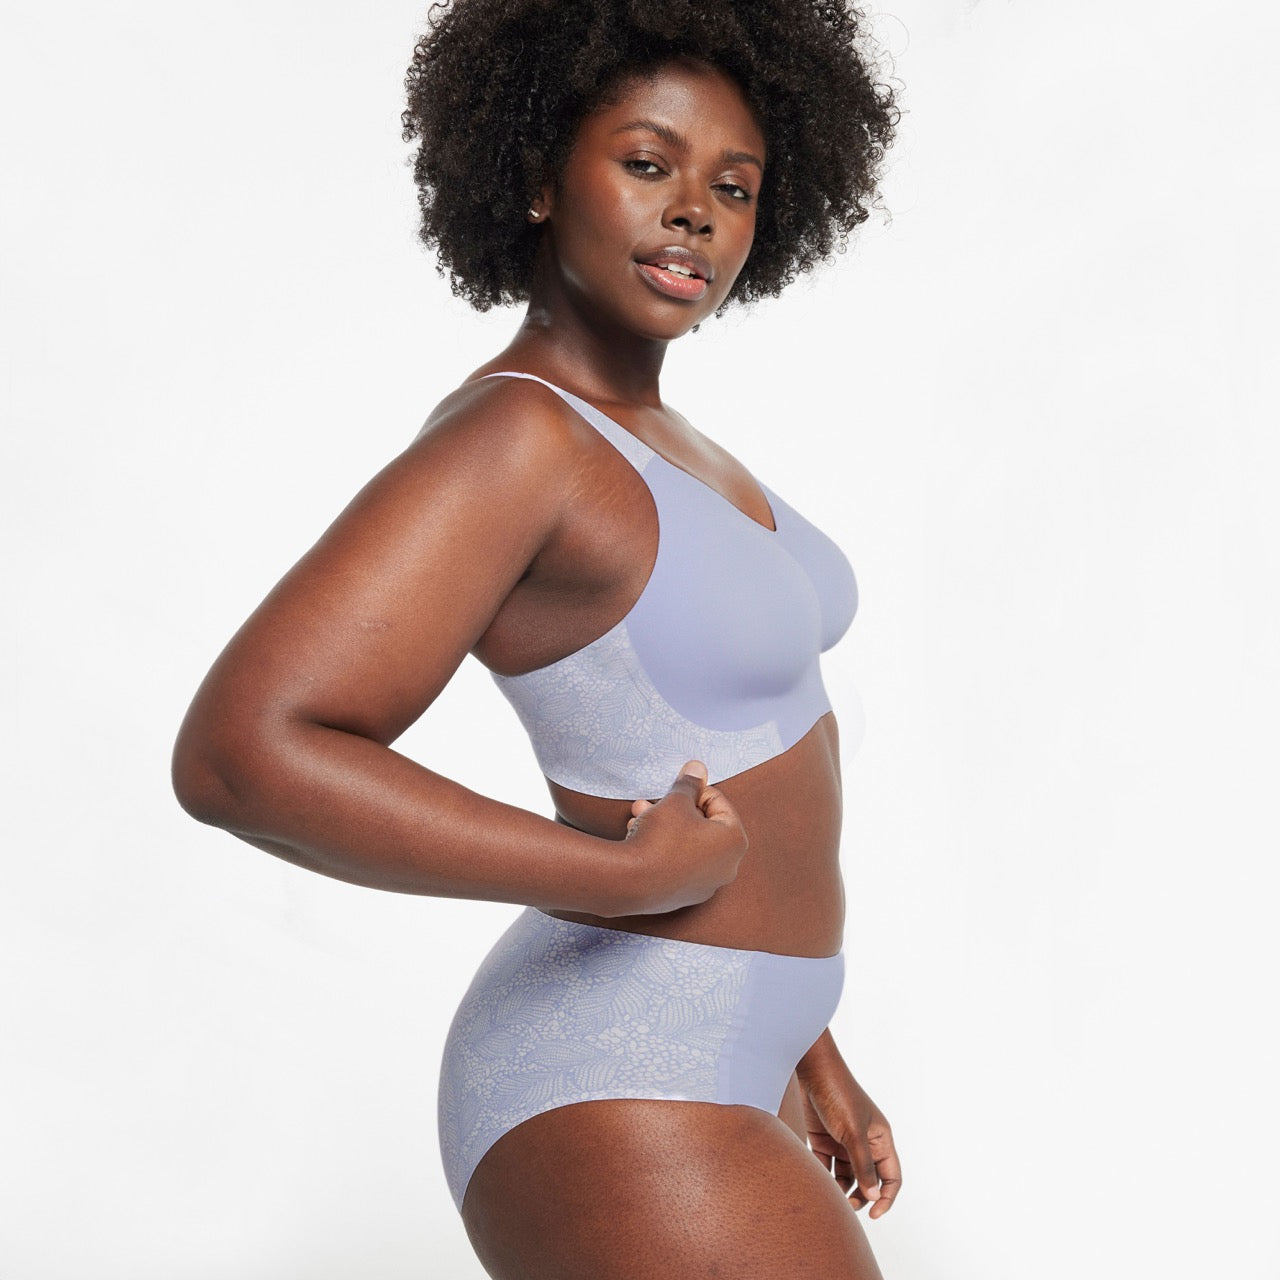 All Color: Moonstone Lace | flexible band hook and eye wireless bra